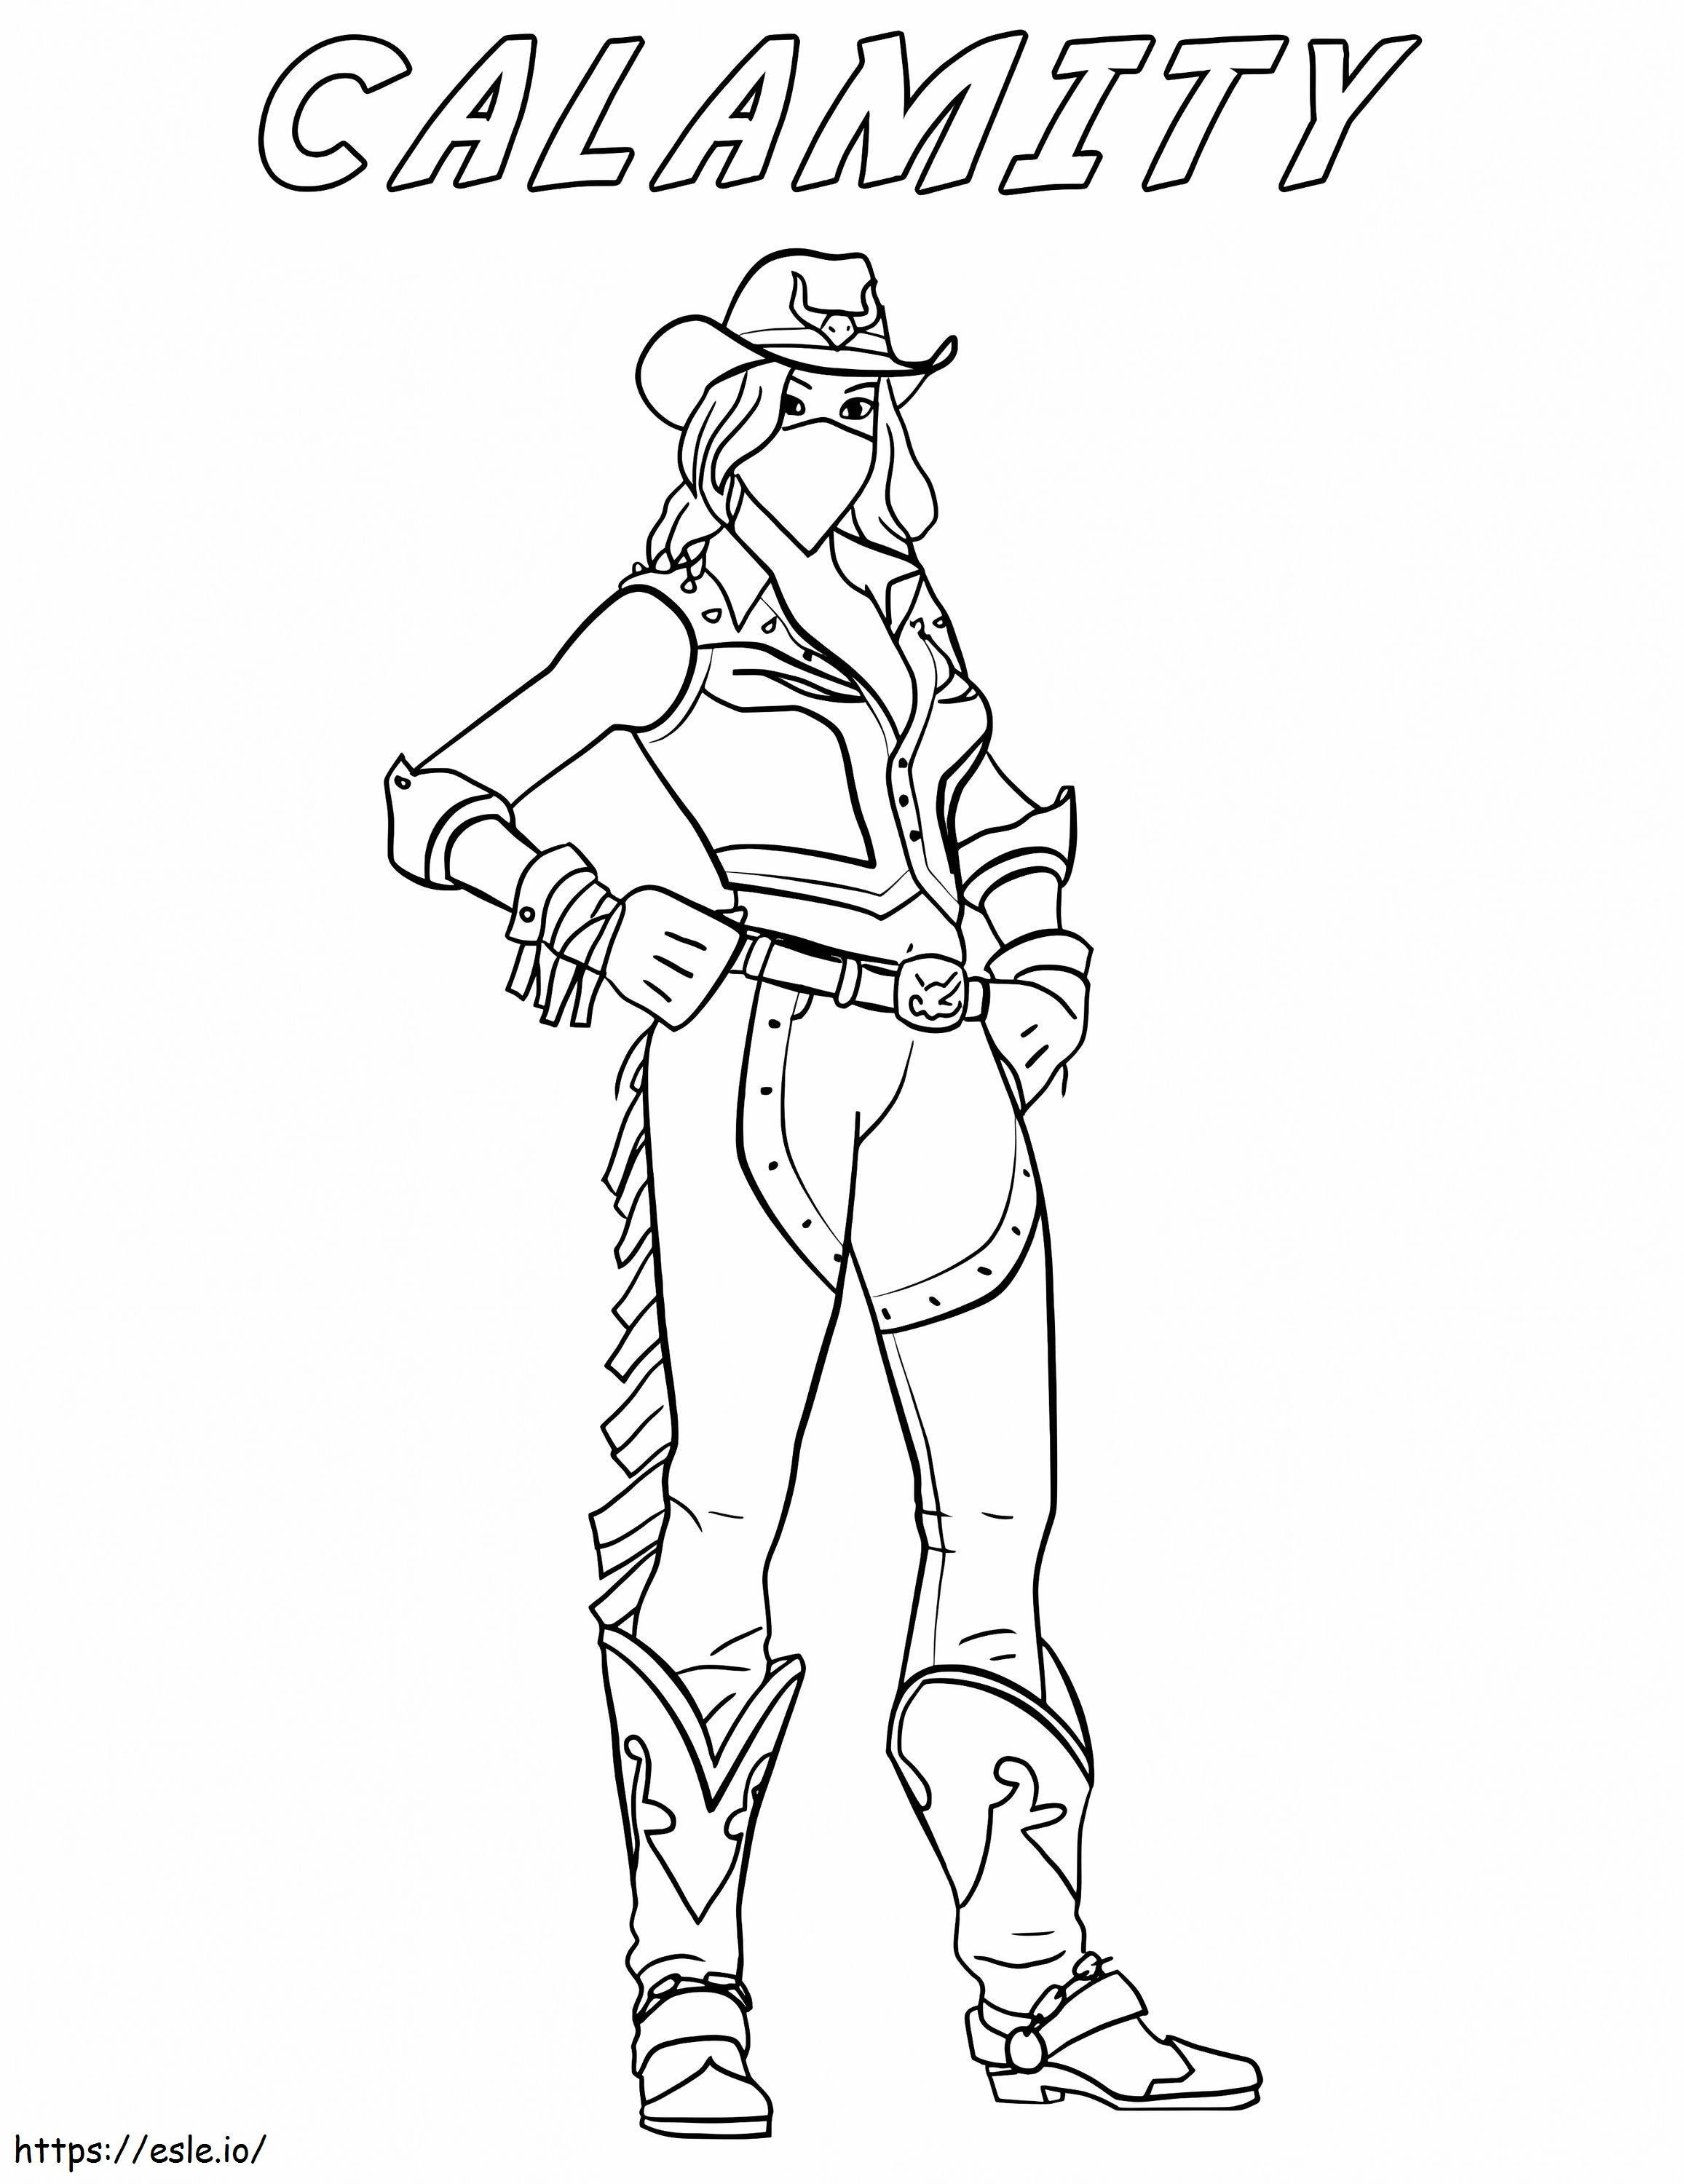 Calamity Fortnite coloring page